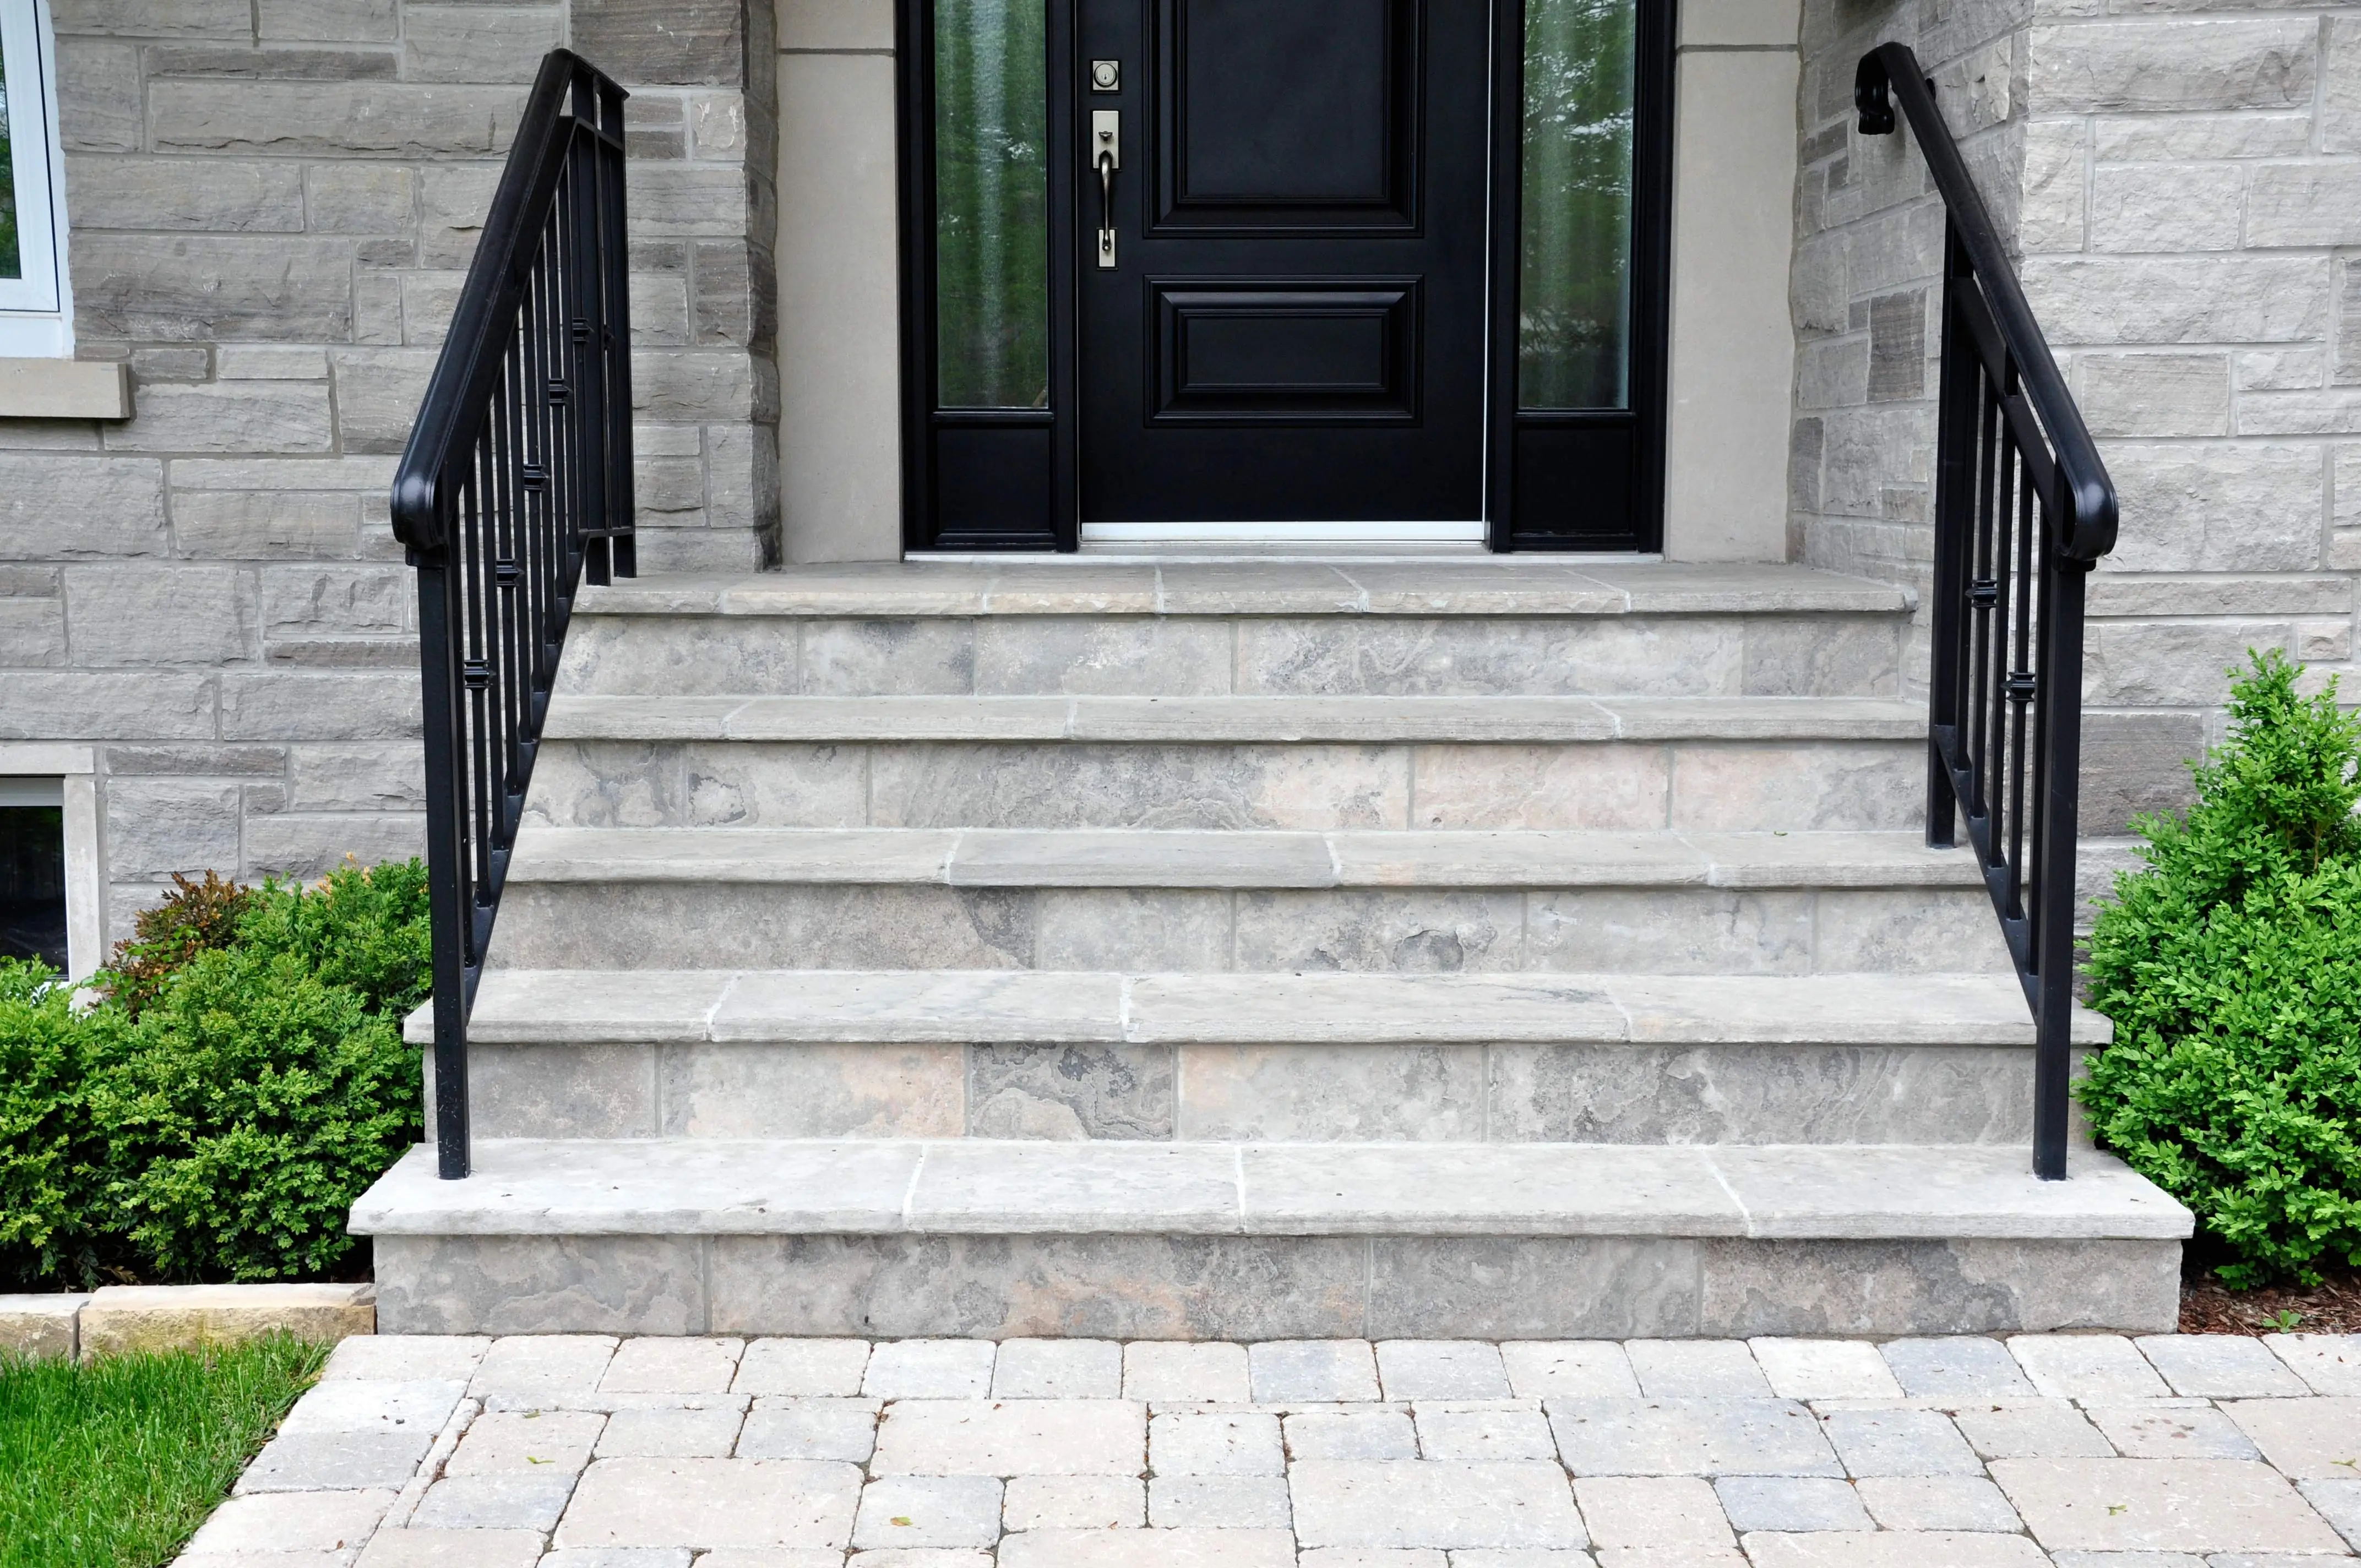 Elegant front steps and landing with black railings constructed by experienced masonry contractors in Manayunk